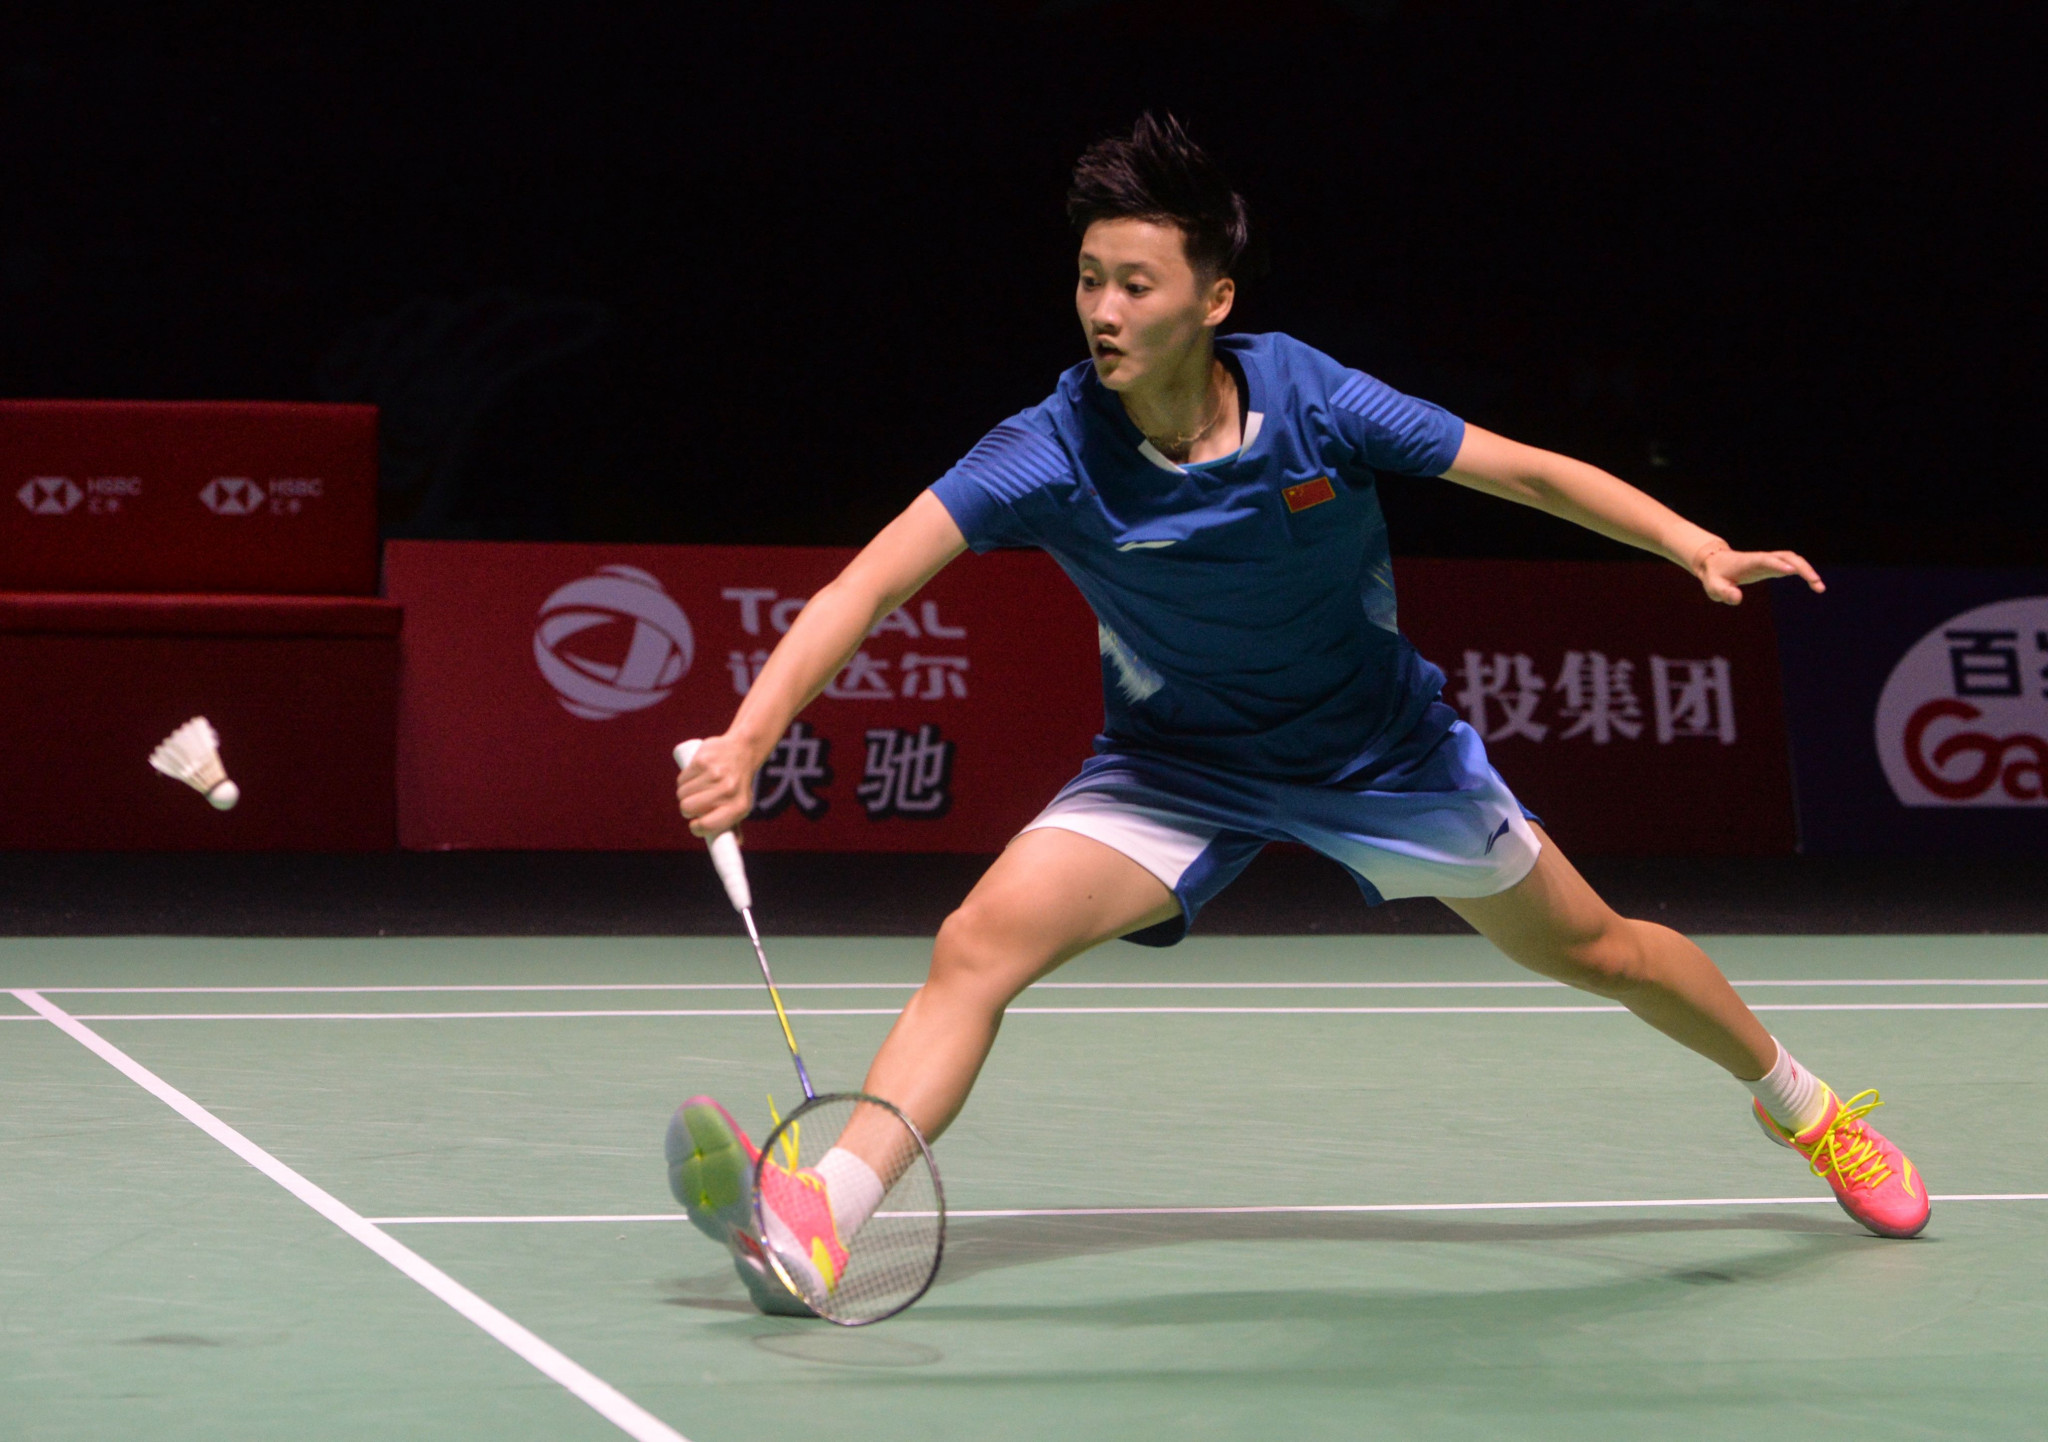 China's Chen Yufei ended the run of Carolina Marin ©Getty Images